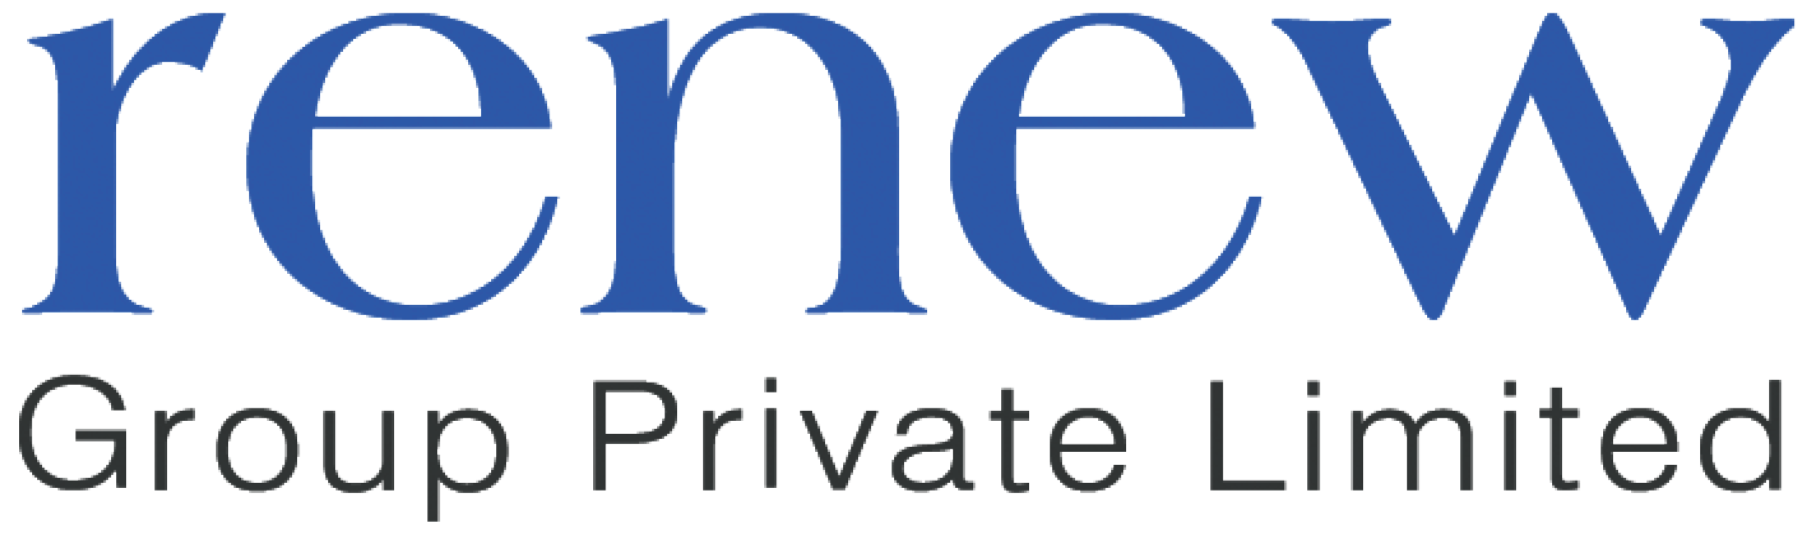 Renew Group Private Limited.jpg